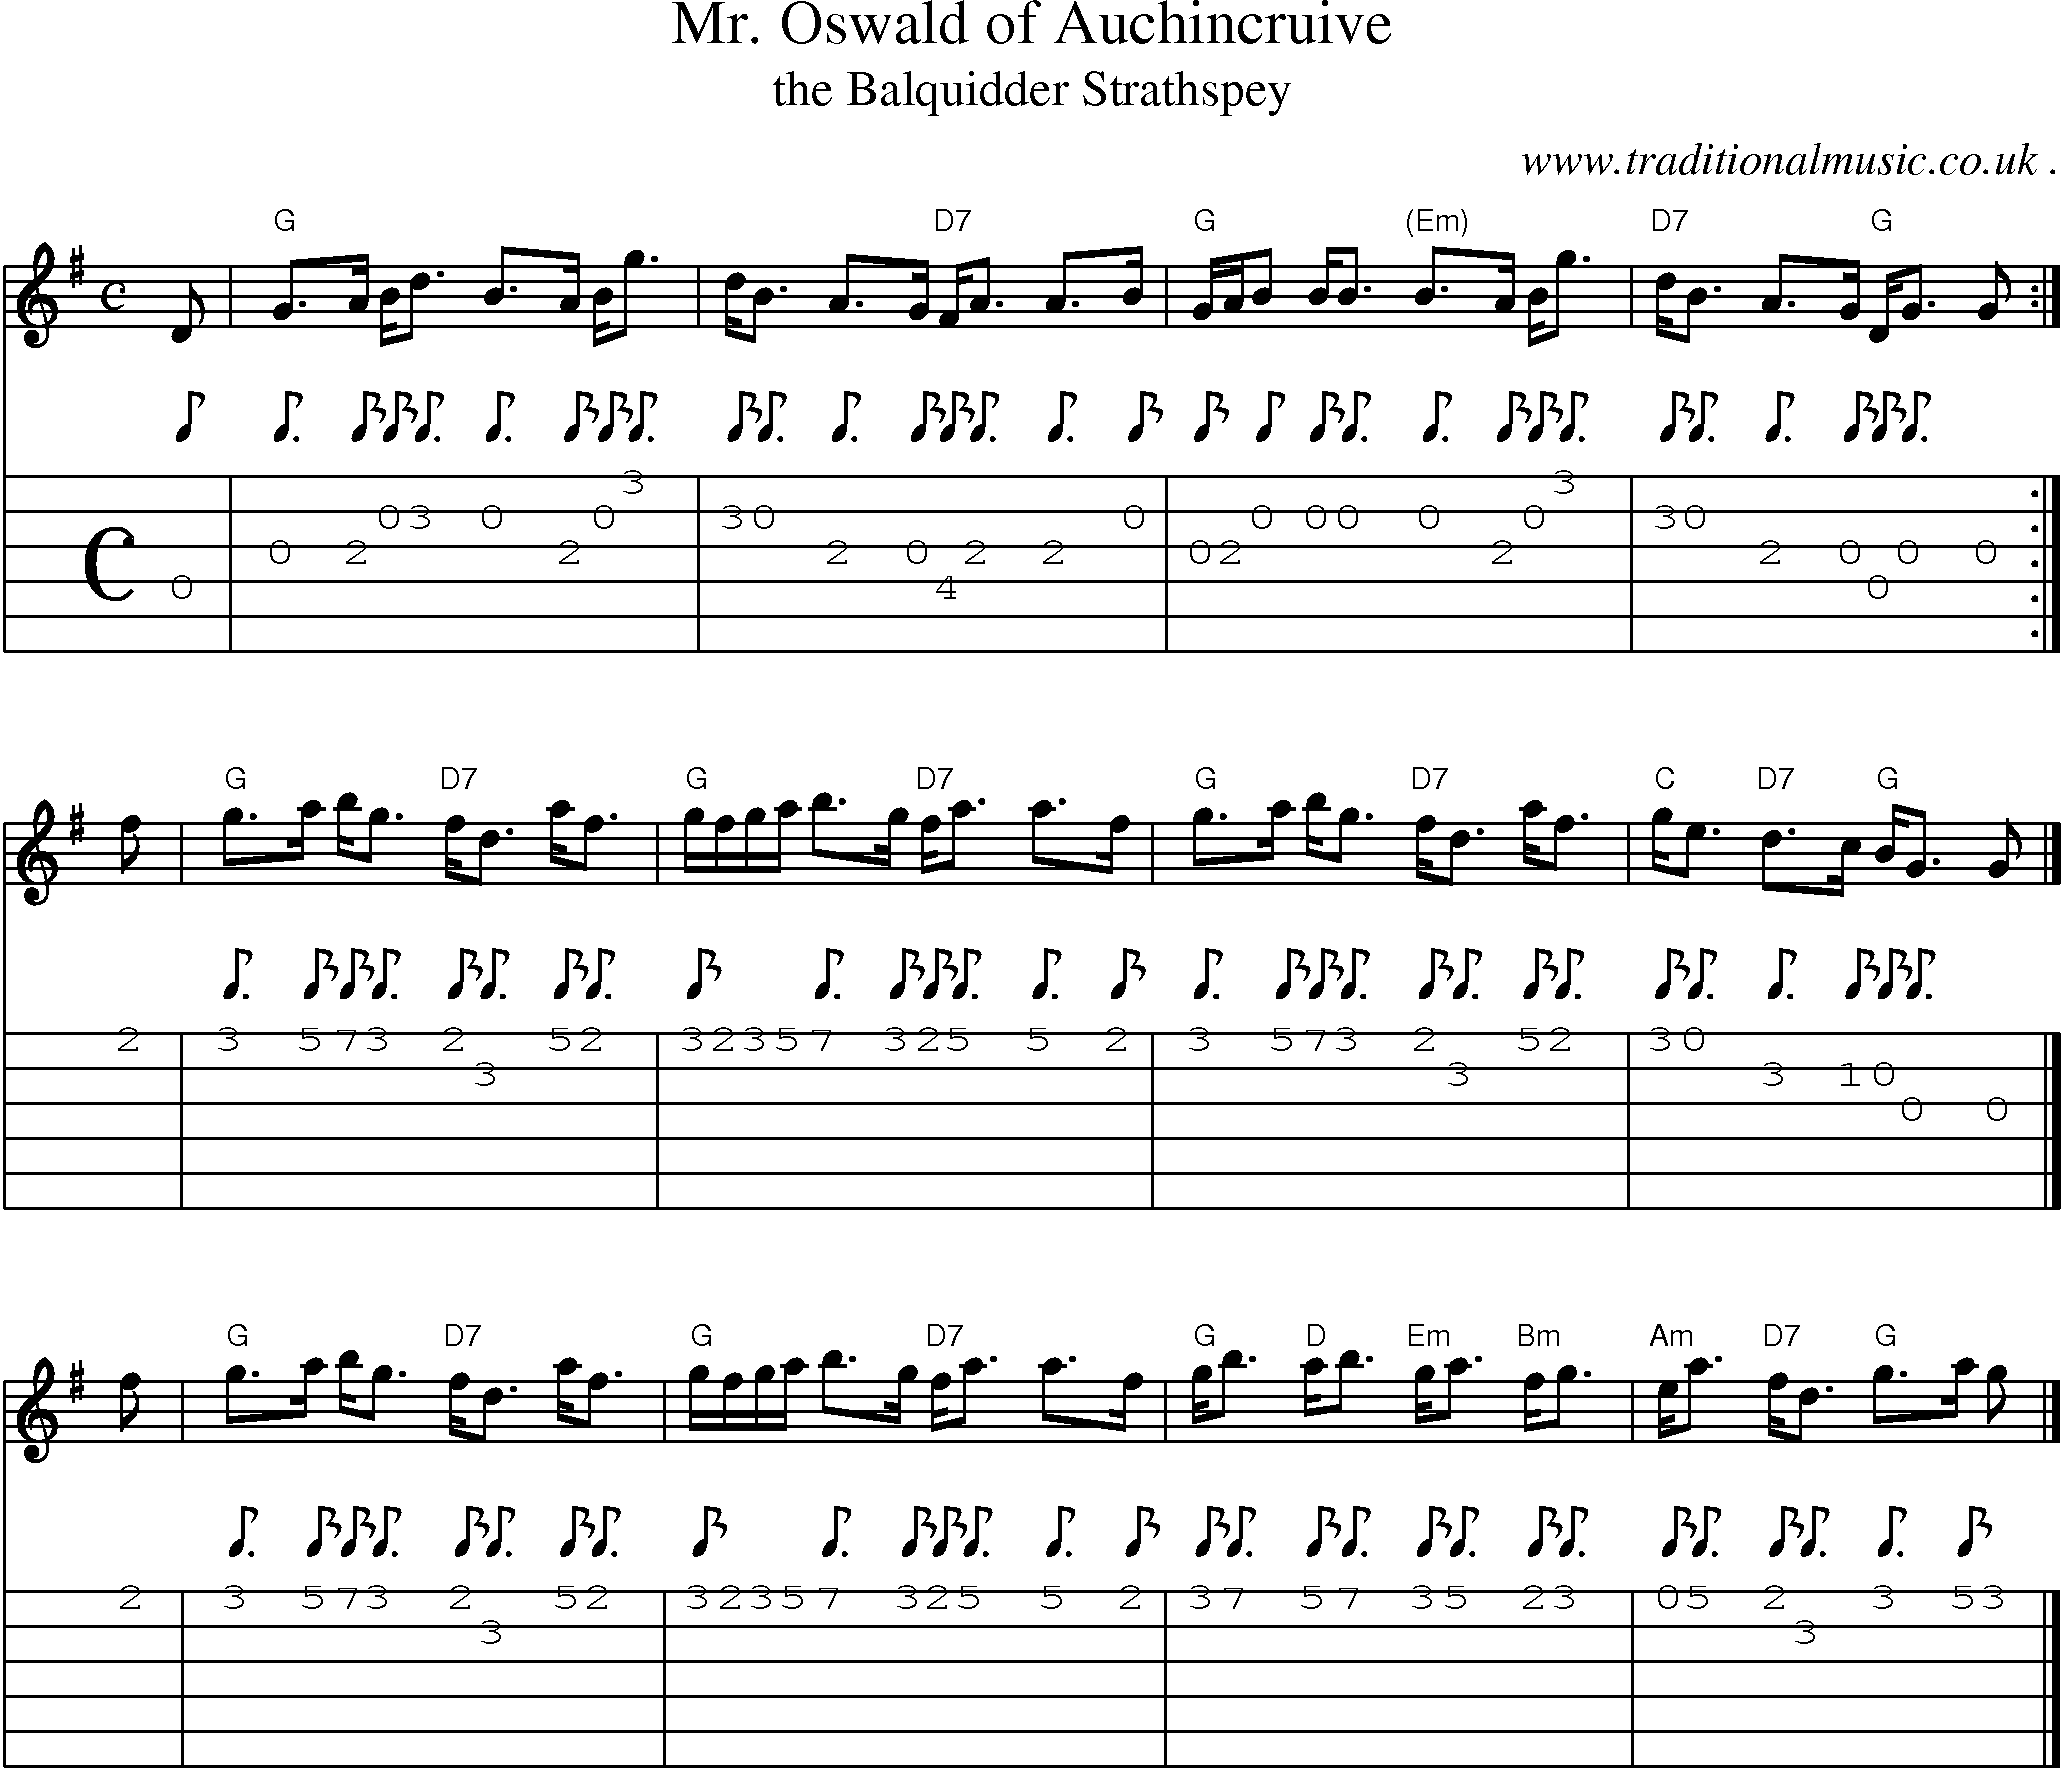 Sheet-music  score, Chords and Guitar Tabs for Mr Oswald Of Auchincruive